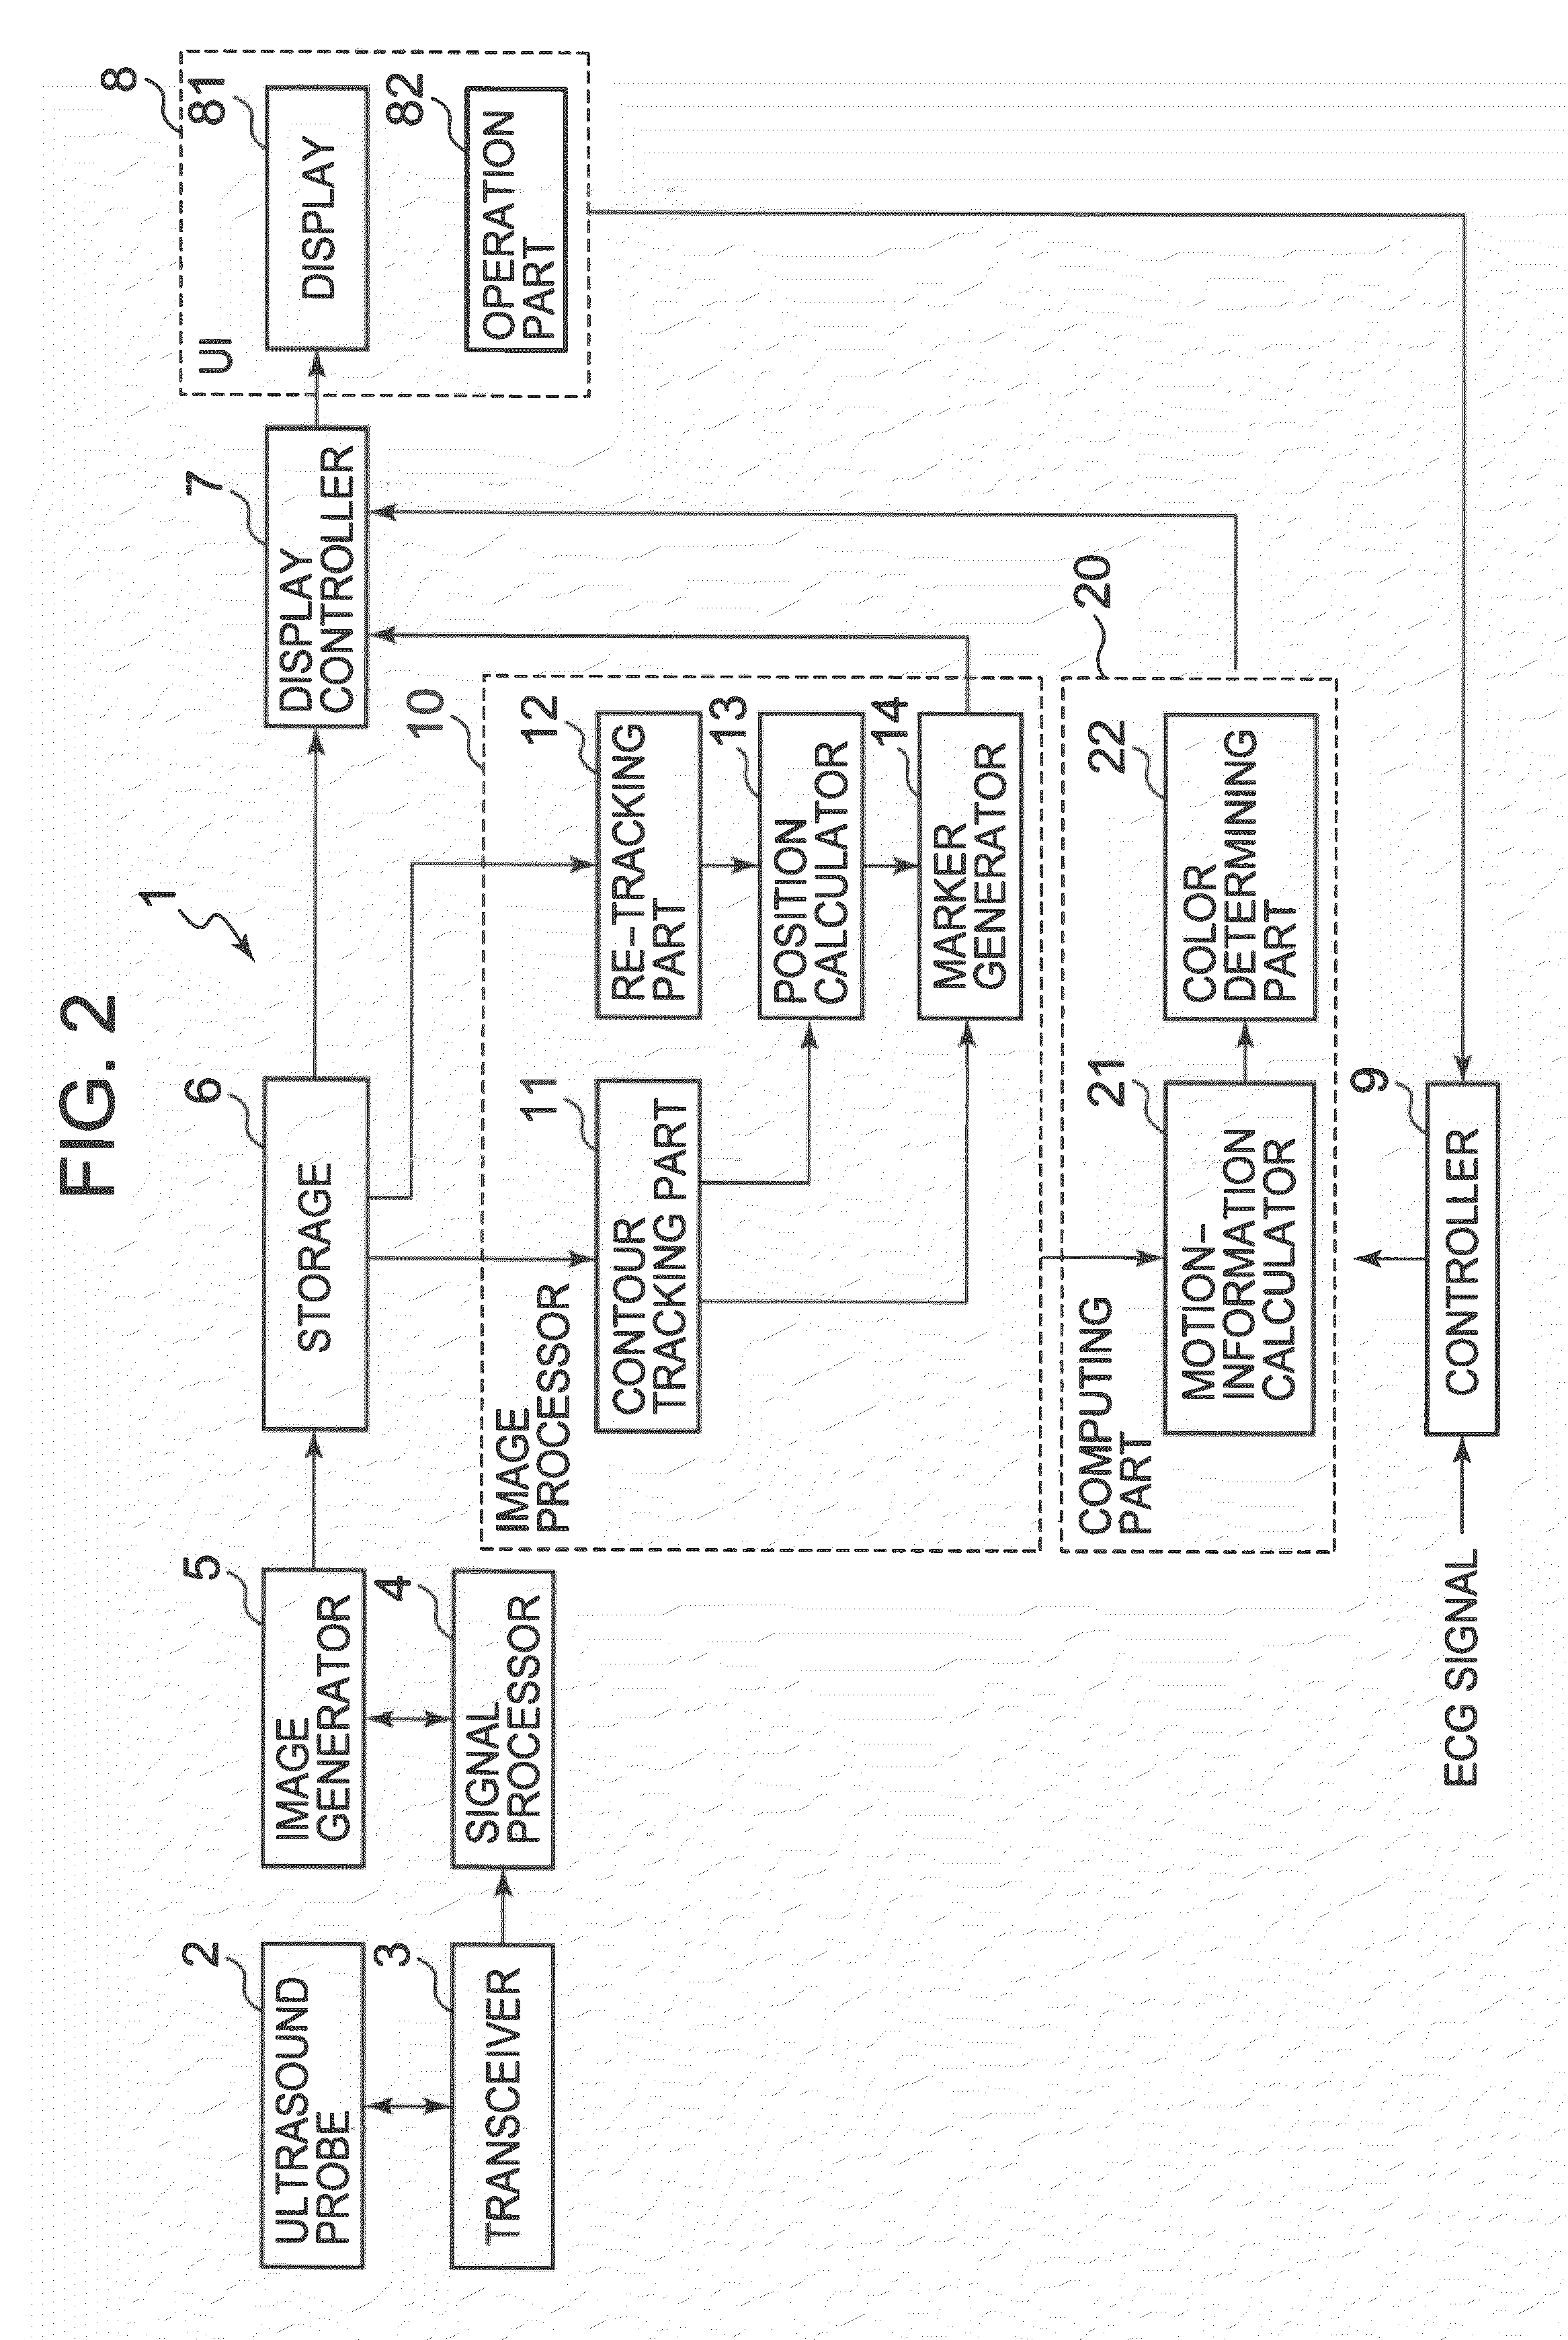 Ultrasound imaging apparatus and method for processing ultrasound image